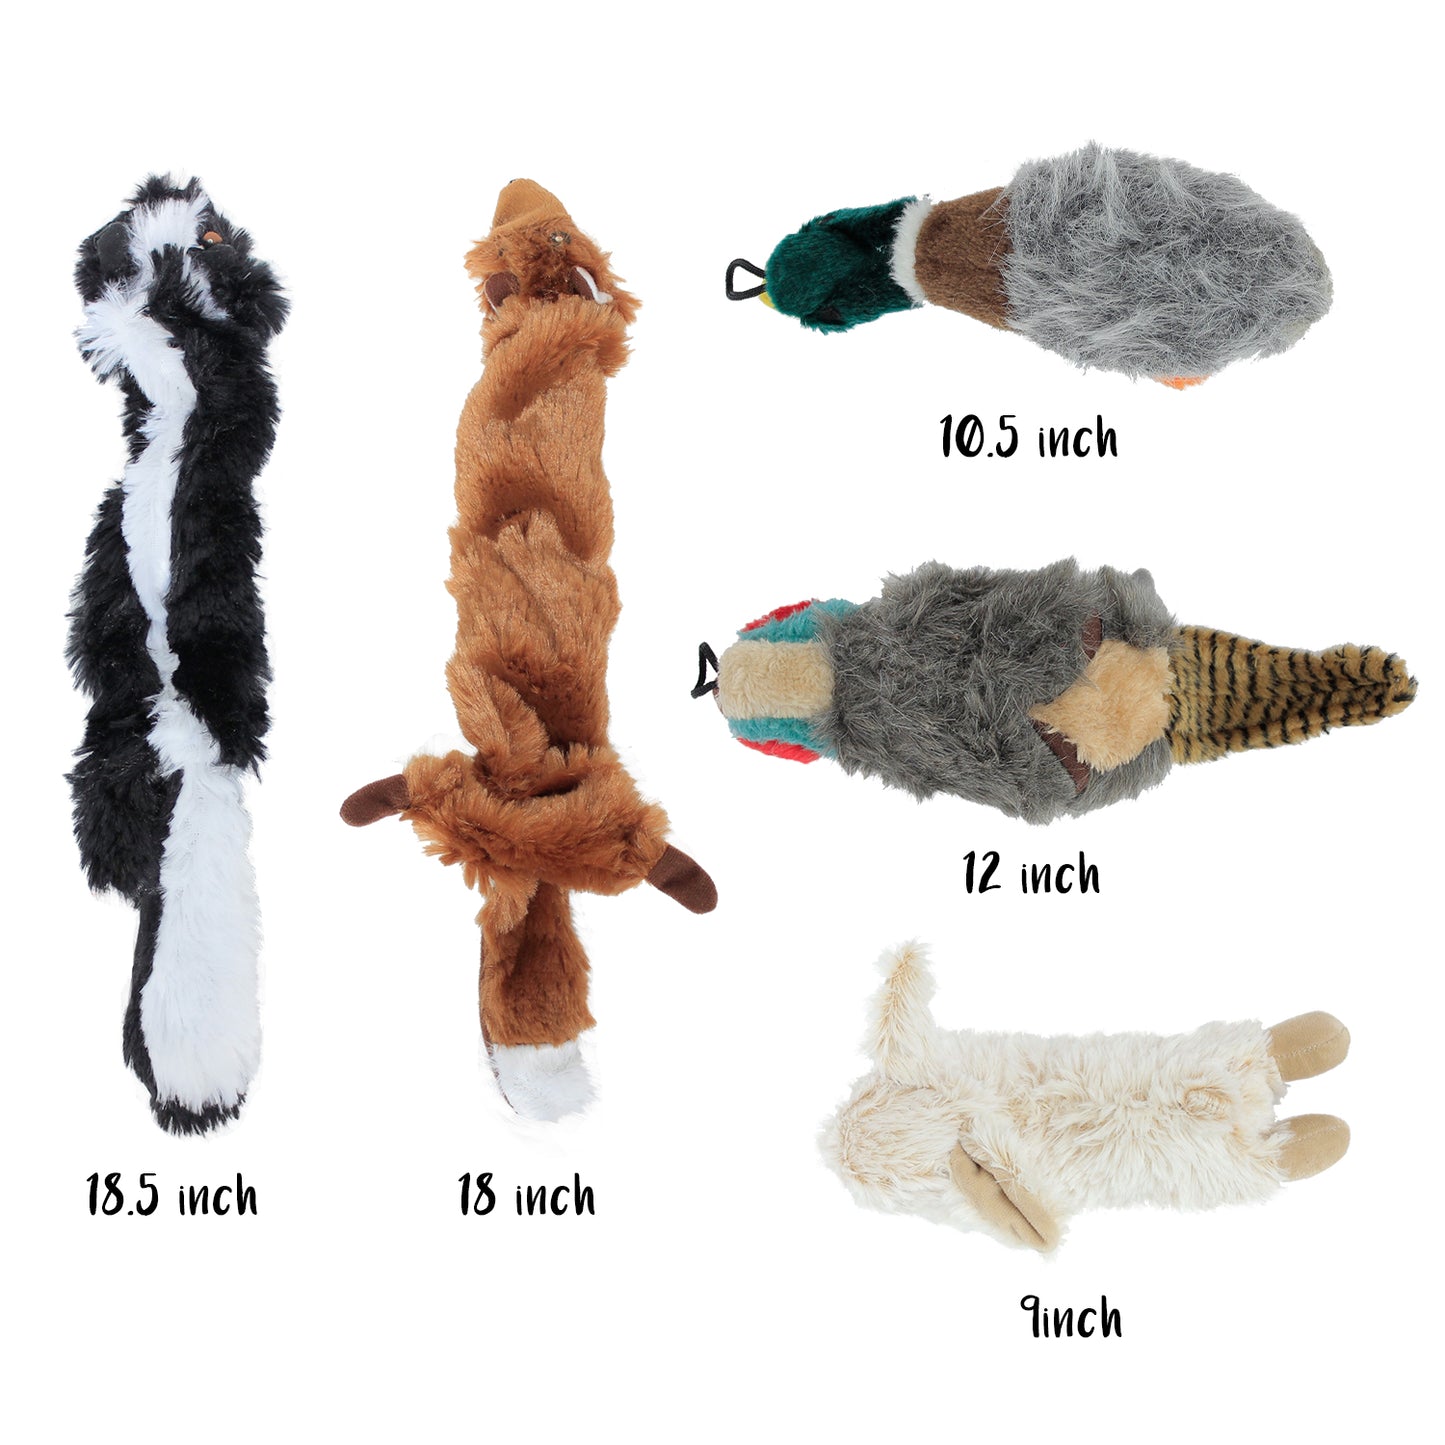 Stuffed Dog Toy Gift Big Bundle 5-Pack with Duck, Rabbit, Pheasant, Fox, Racoon - Plush and Durable for Small, Medium, and Large Dogs